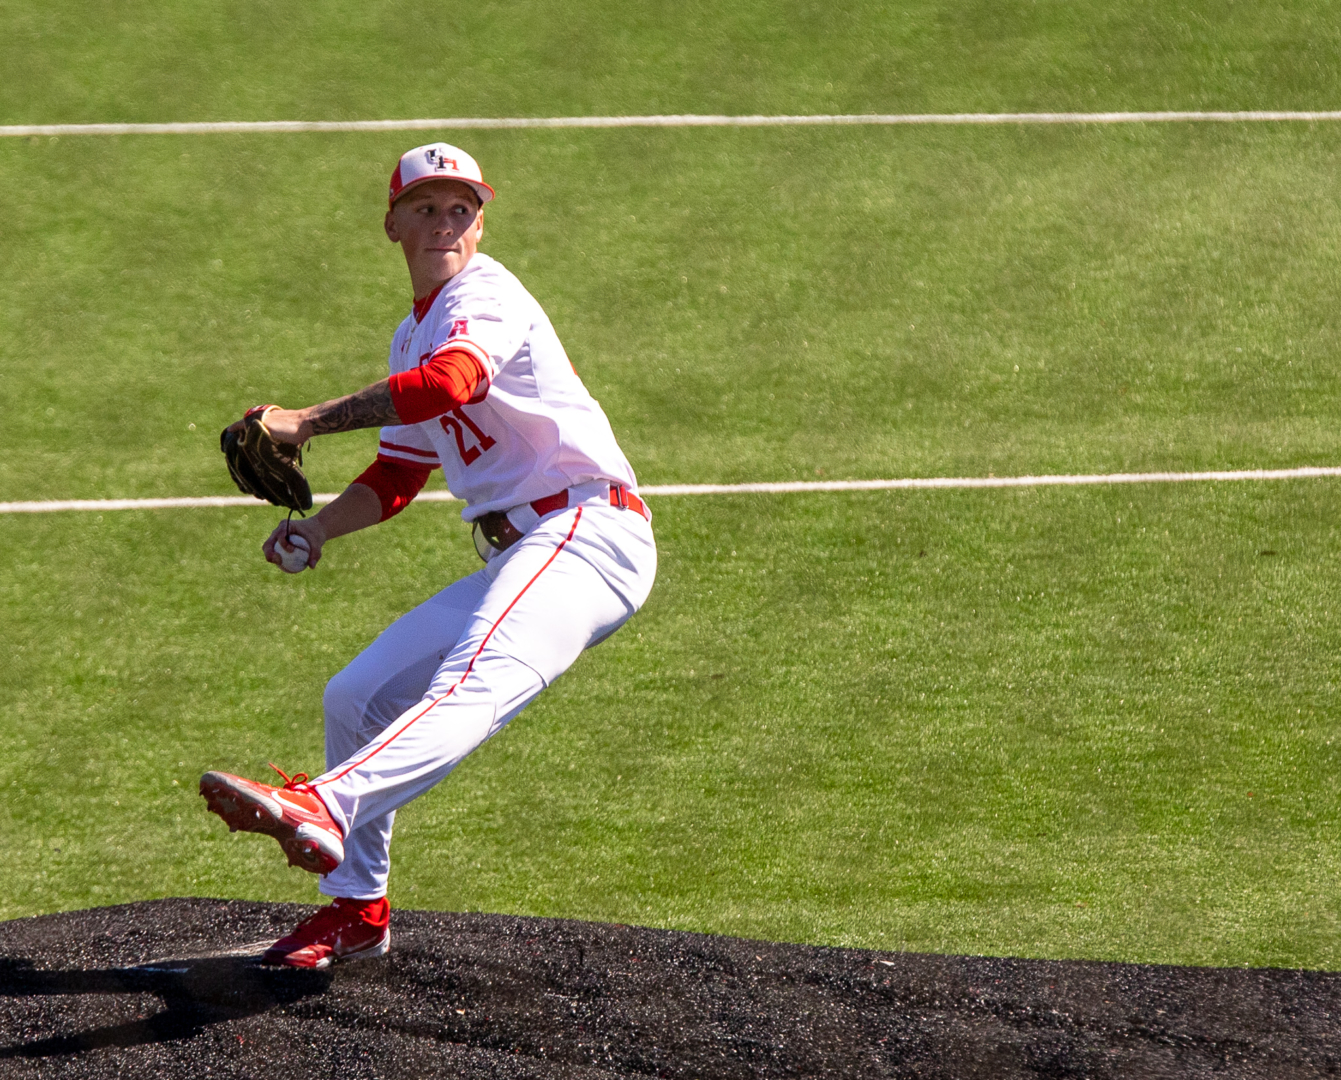 UH baseball sophomore right-hander Jaycob Deese makes his UH debut in the Cougars season opener against TSU. The UH baseball team played against Lamar on Wednesday. | Andy Yanez/The Cougar